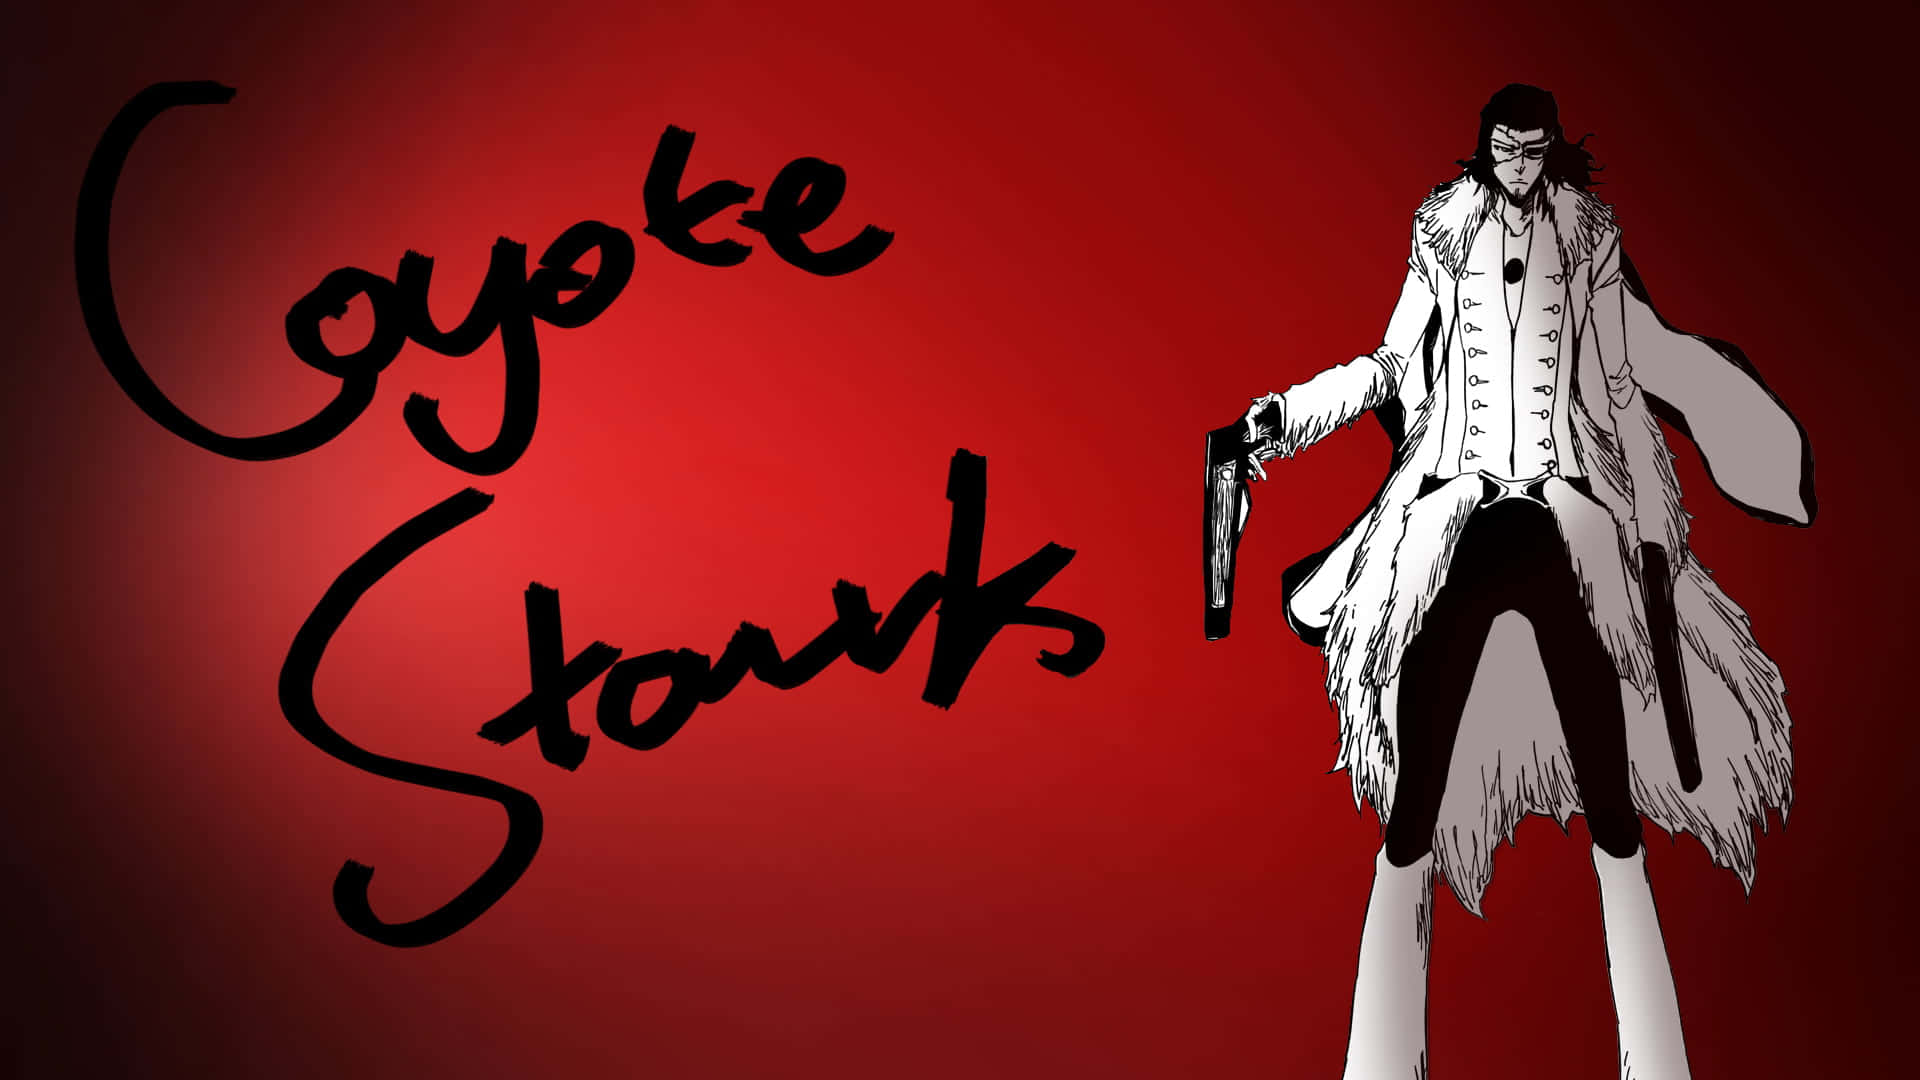 Captivating Coyote Starrk in Action Wallpaper